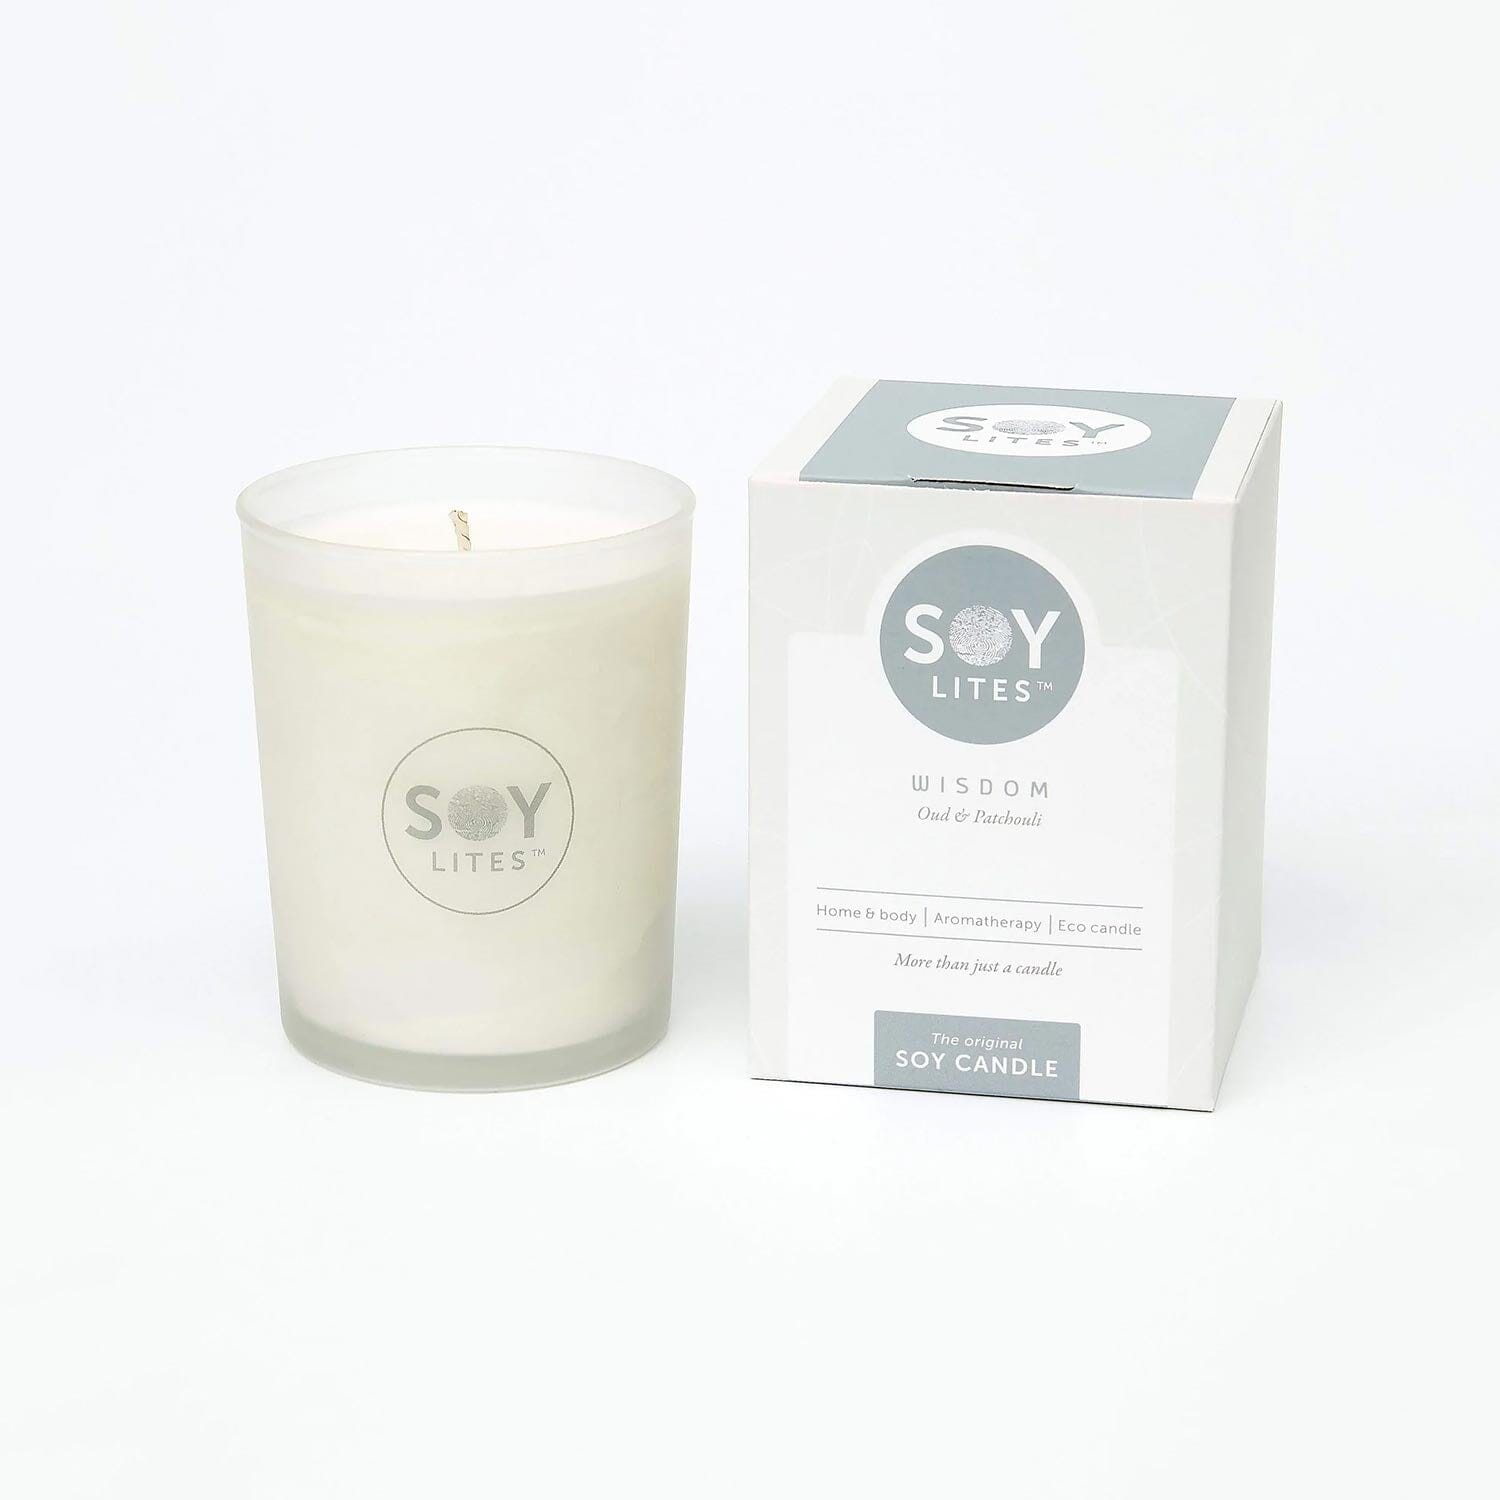 SoyLites 'Wisdom' Soy Candle with Oud & Patchouli Candles SoyLites 